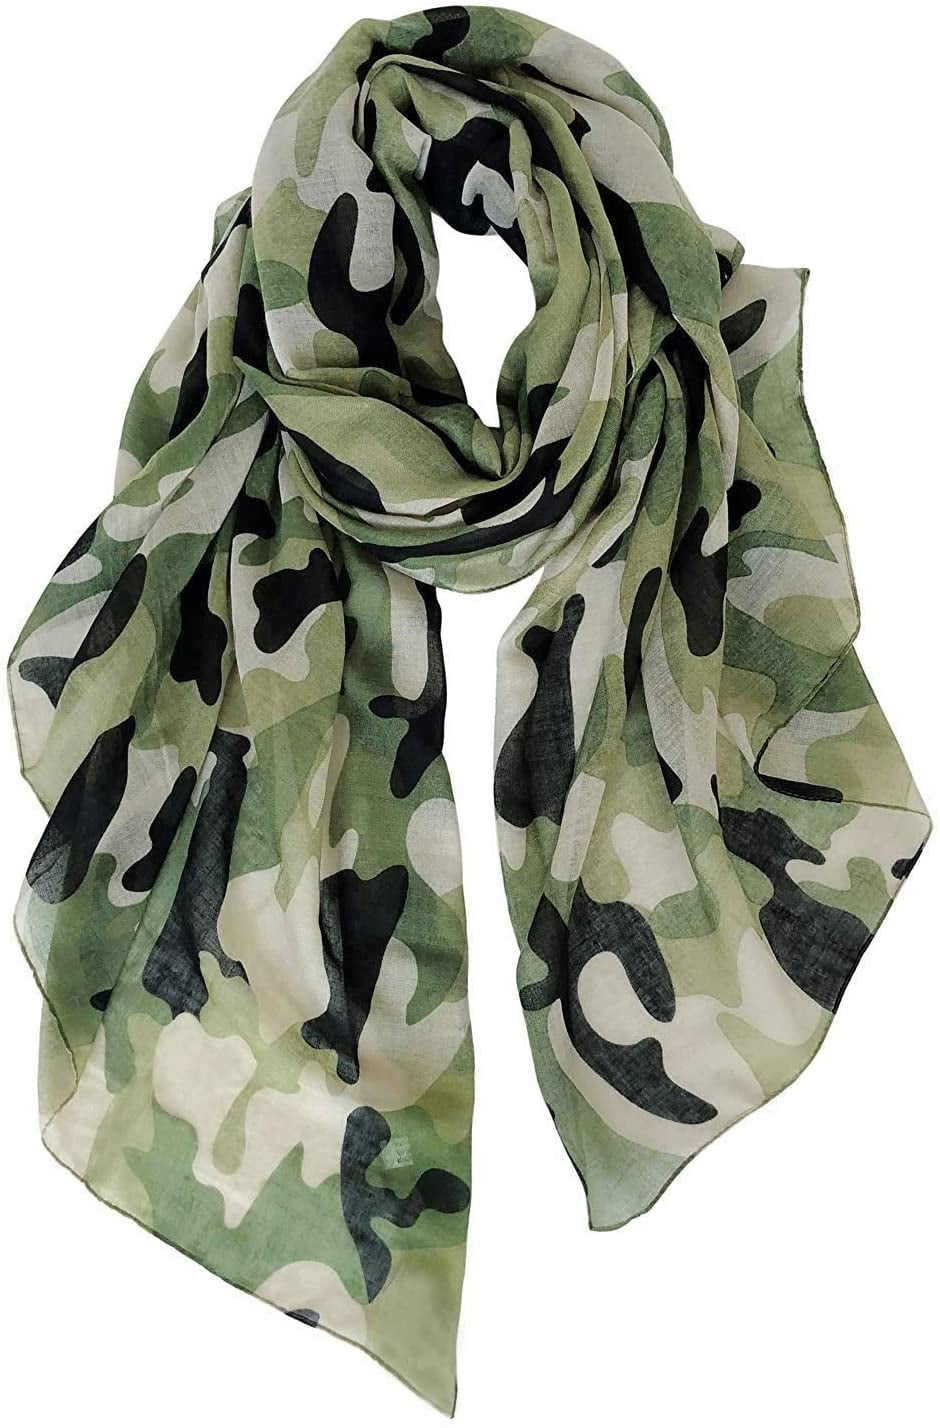 New Green & Yellow Camoflage 12 in 1 Multi Scarf 